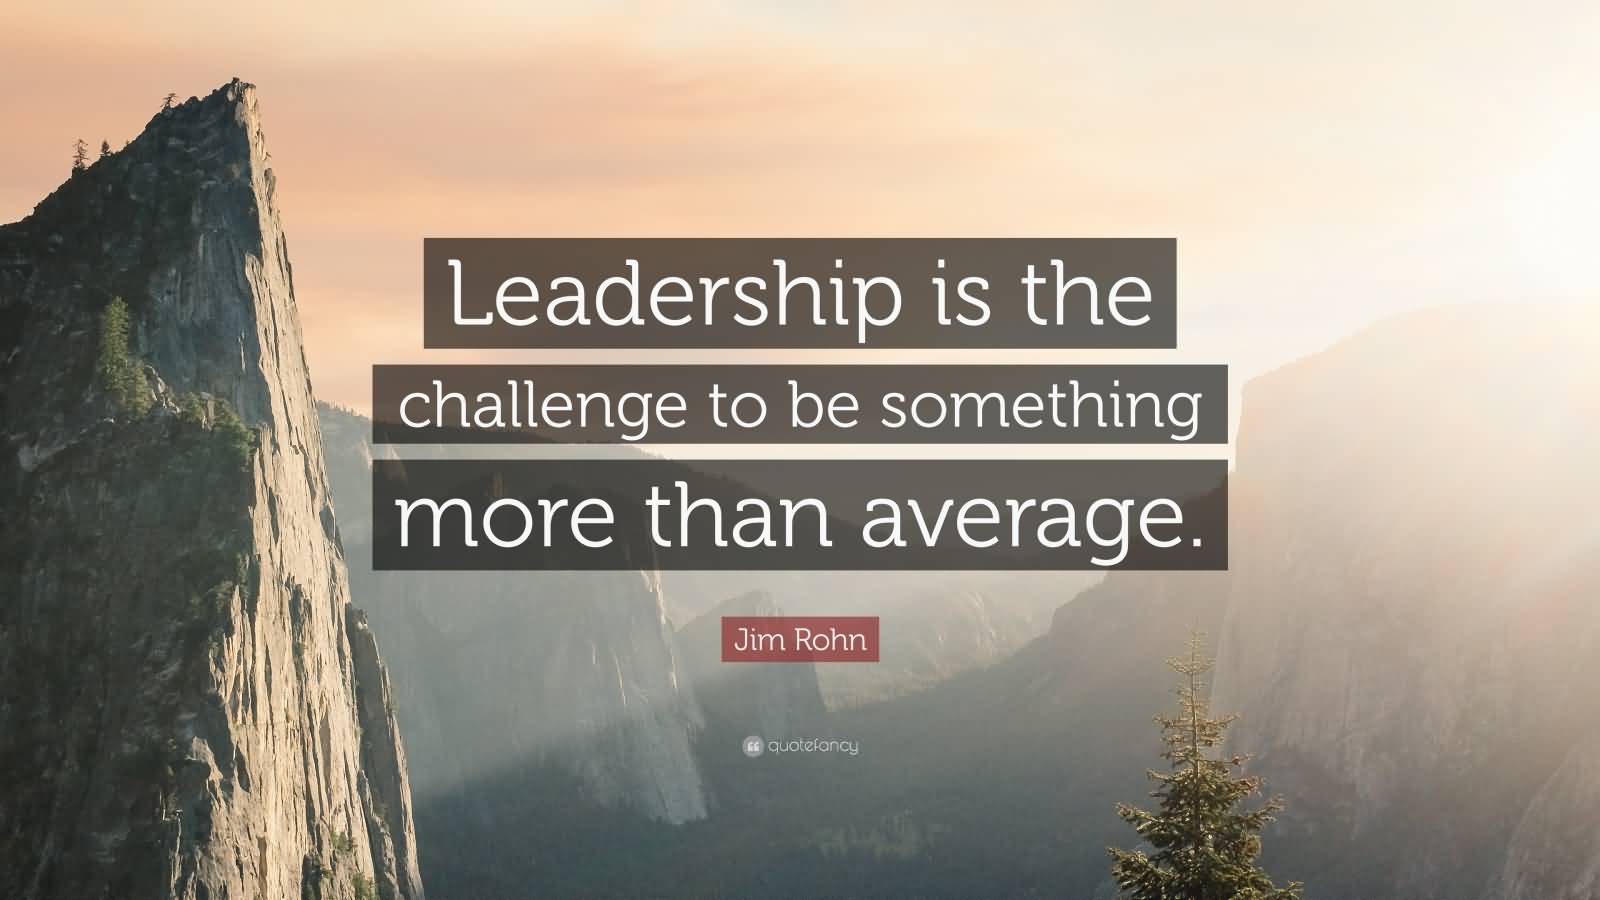 Leadership is the challenge to be something more than average - Jim Rohn